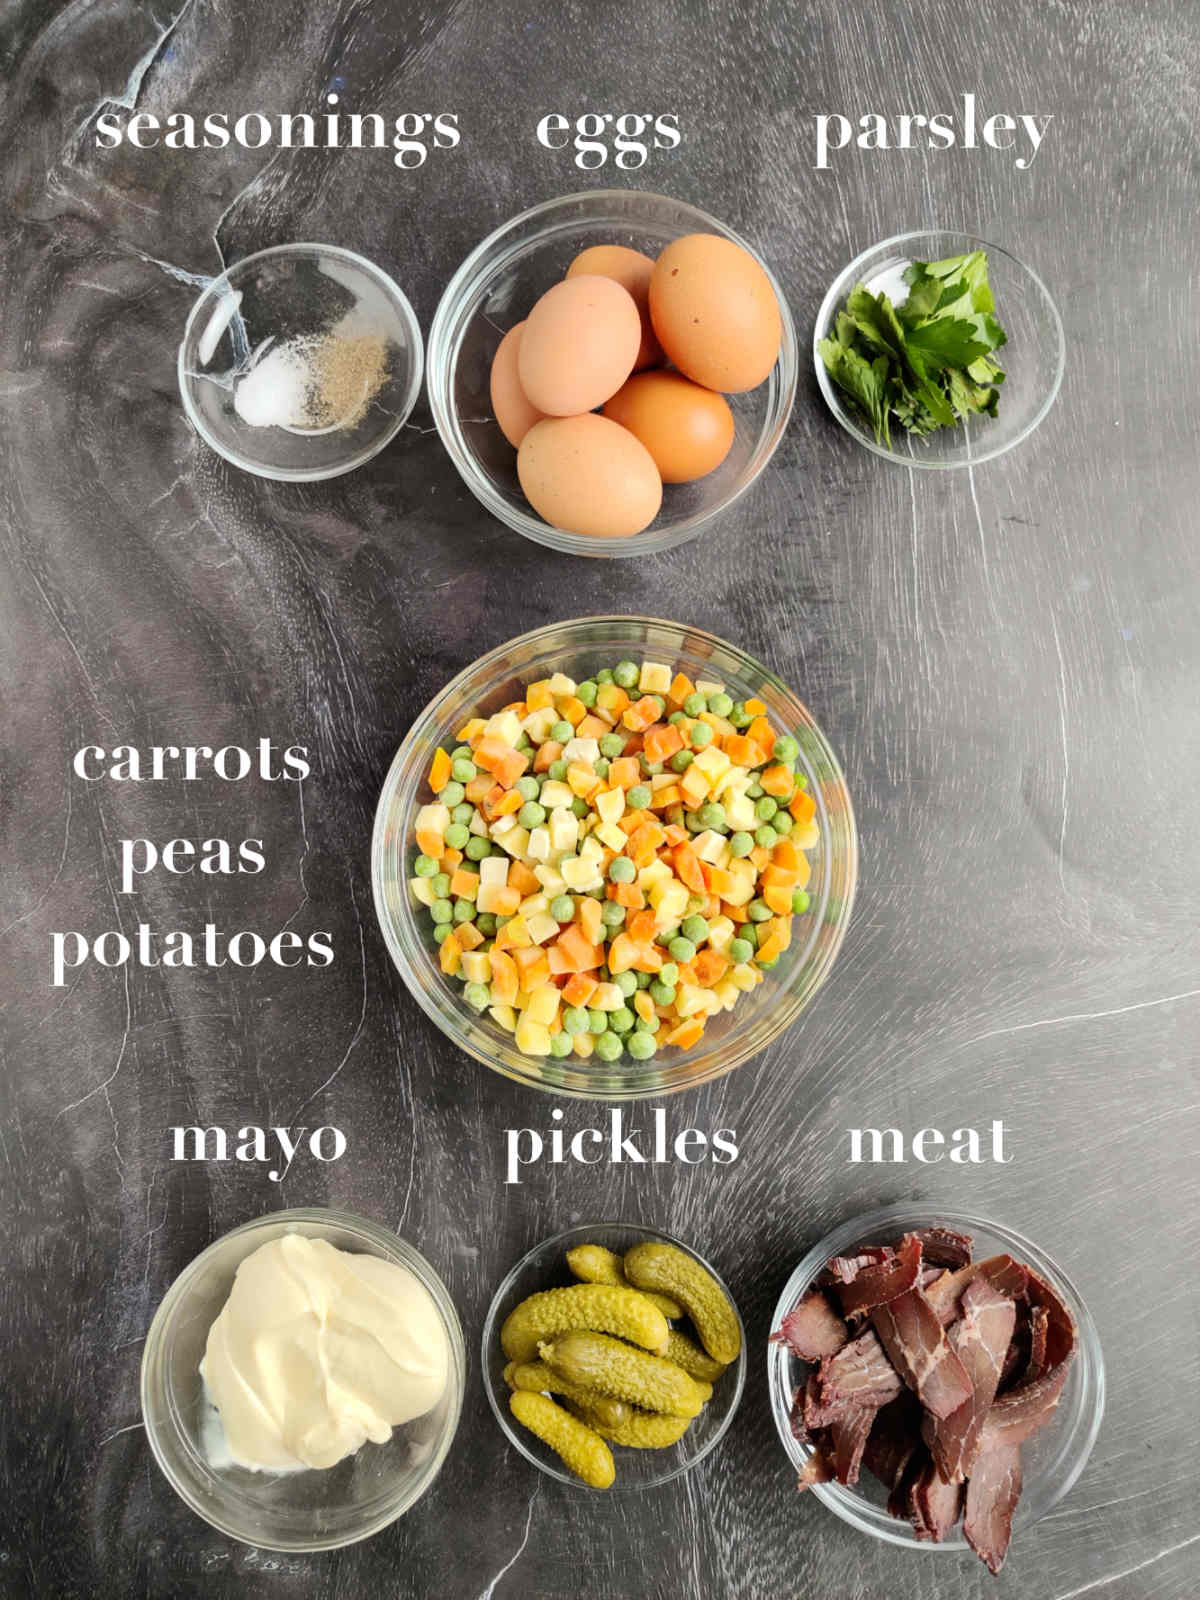 Seasonings, eggs, parsley, carrots, peas, potatoes, mayo, pickles and meat on a gray background. 